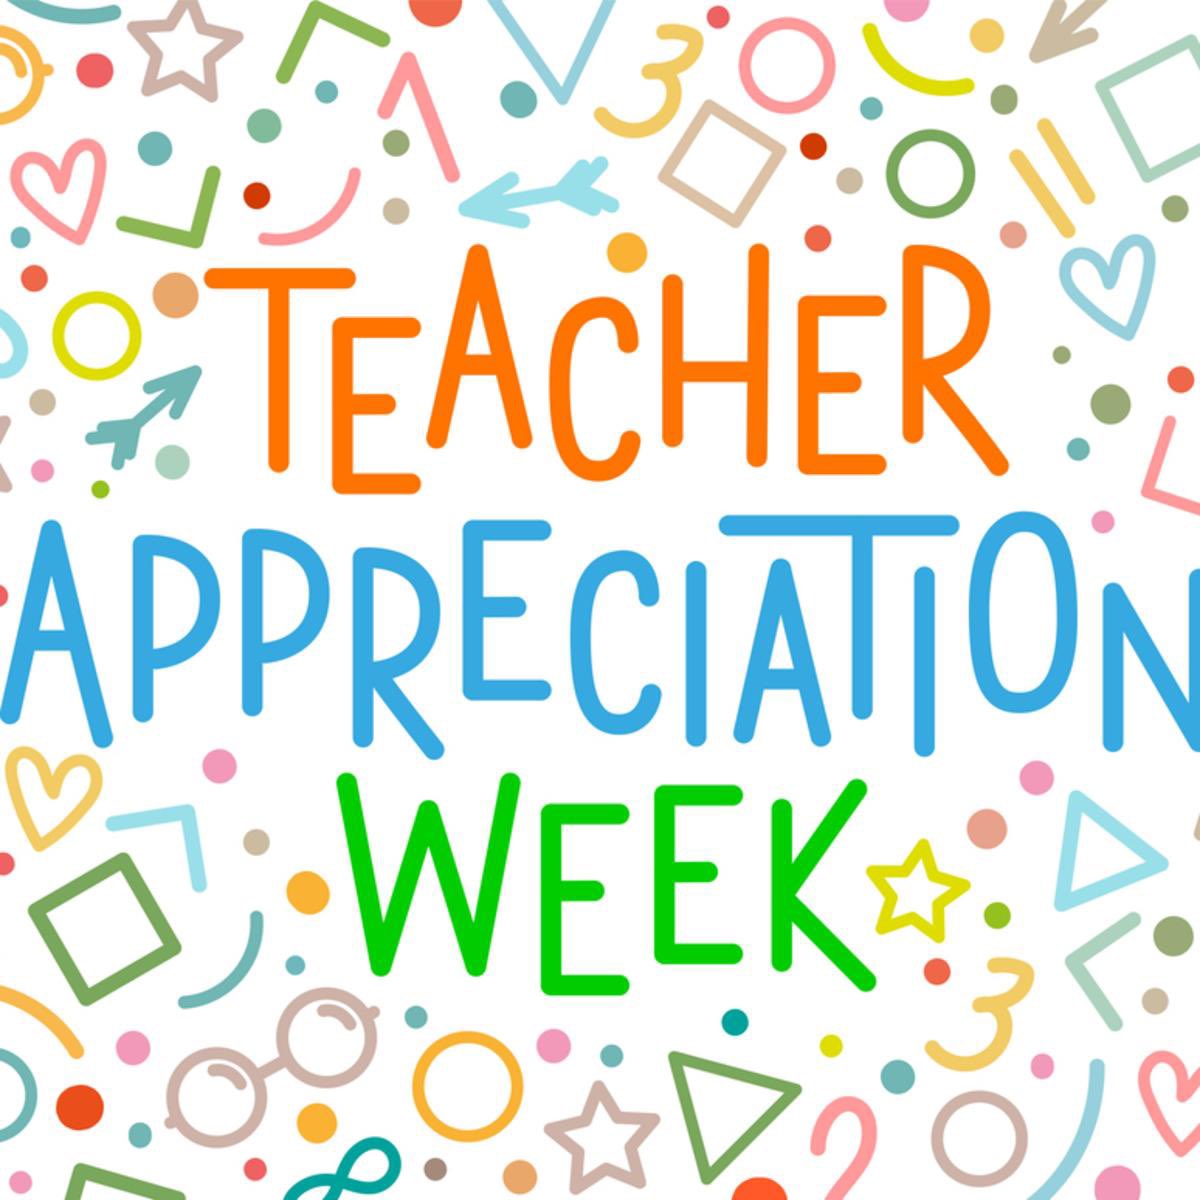 We appreciate all the hard working dedicated teachers here at Davis! Thank you for all you do!!!!